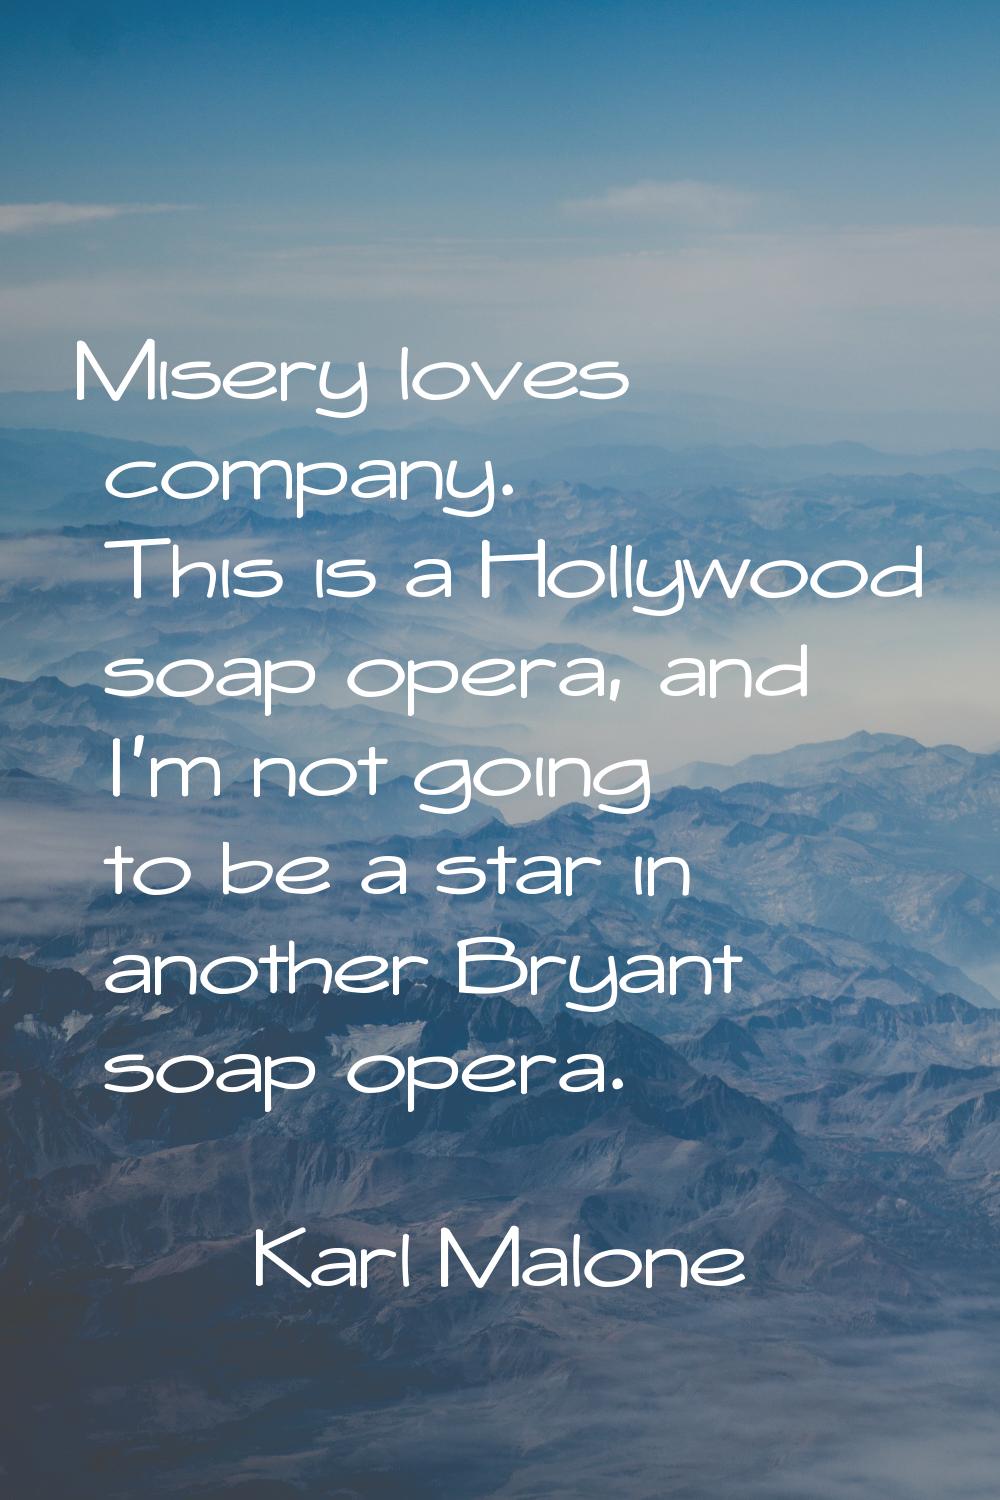 Misery loves company. This is a Hollywood soap opera, and I'm not going to be a star in another Bry